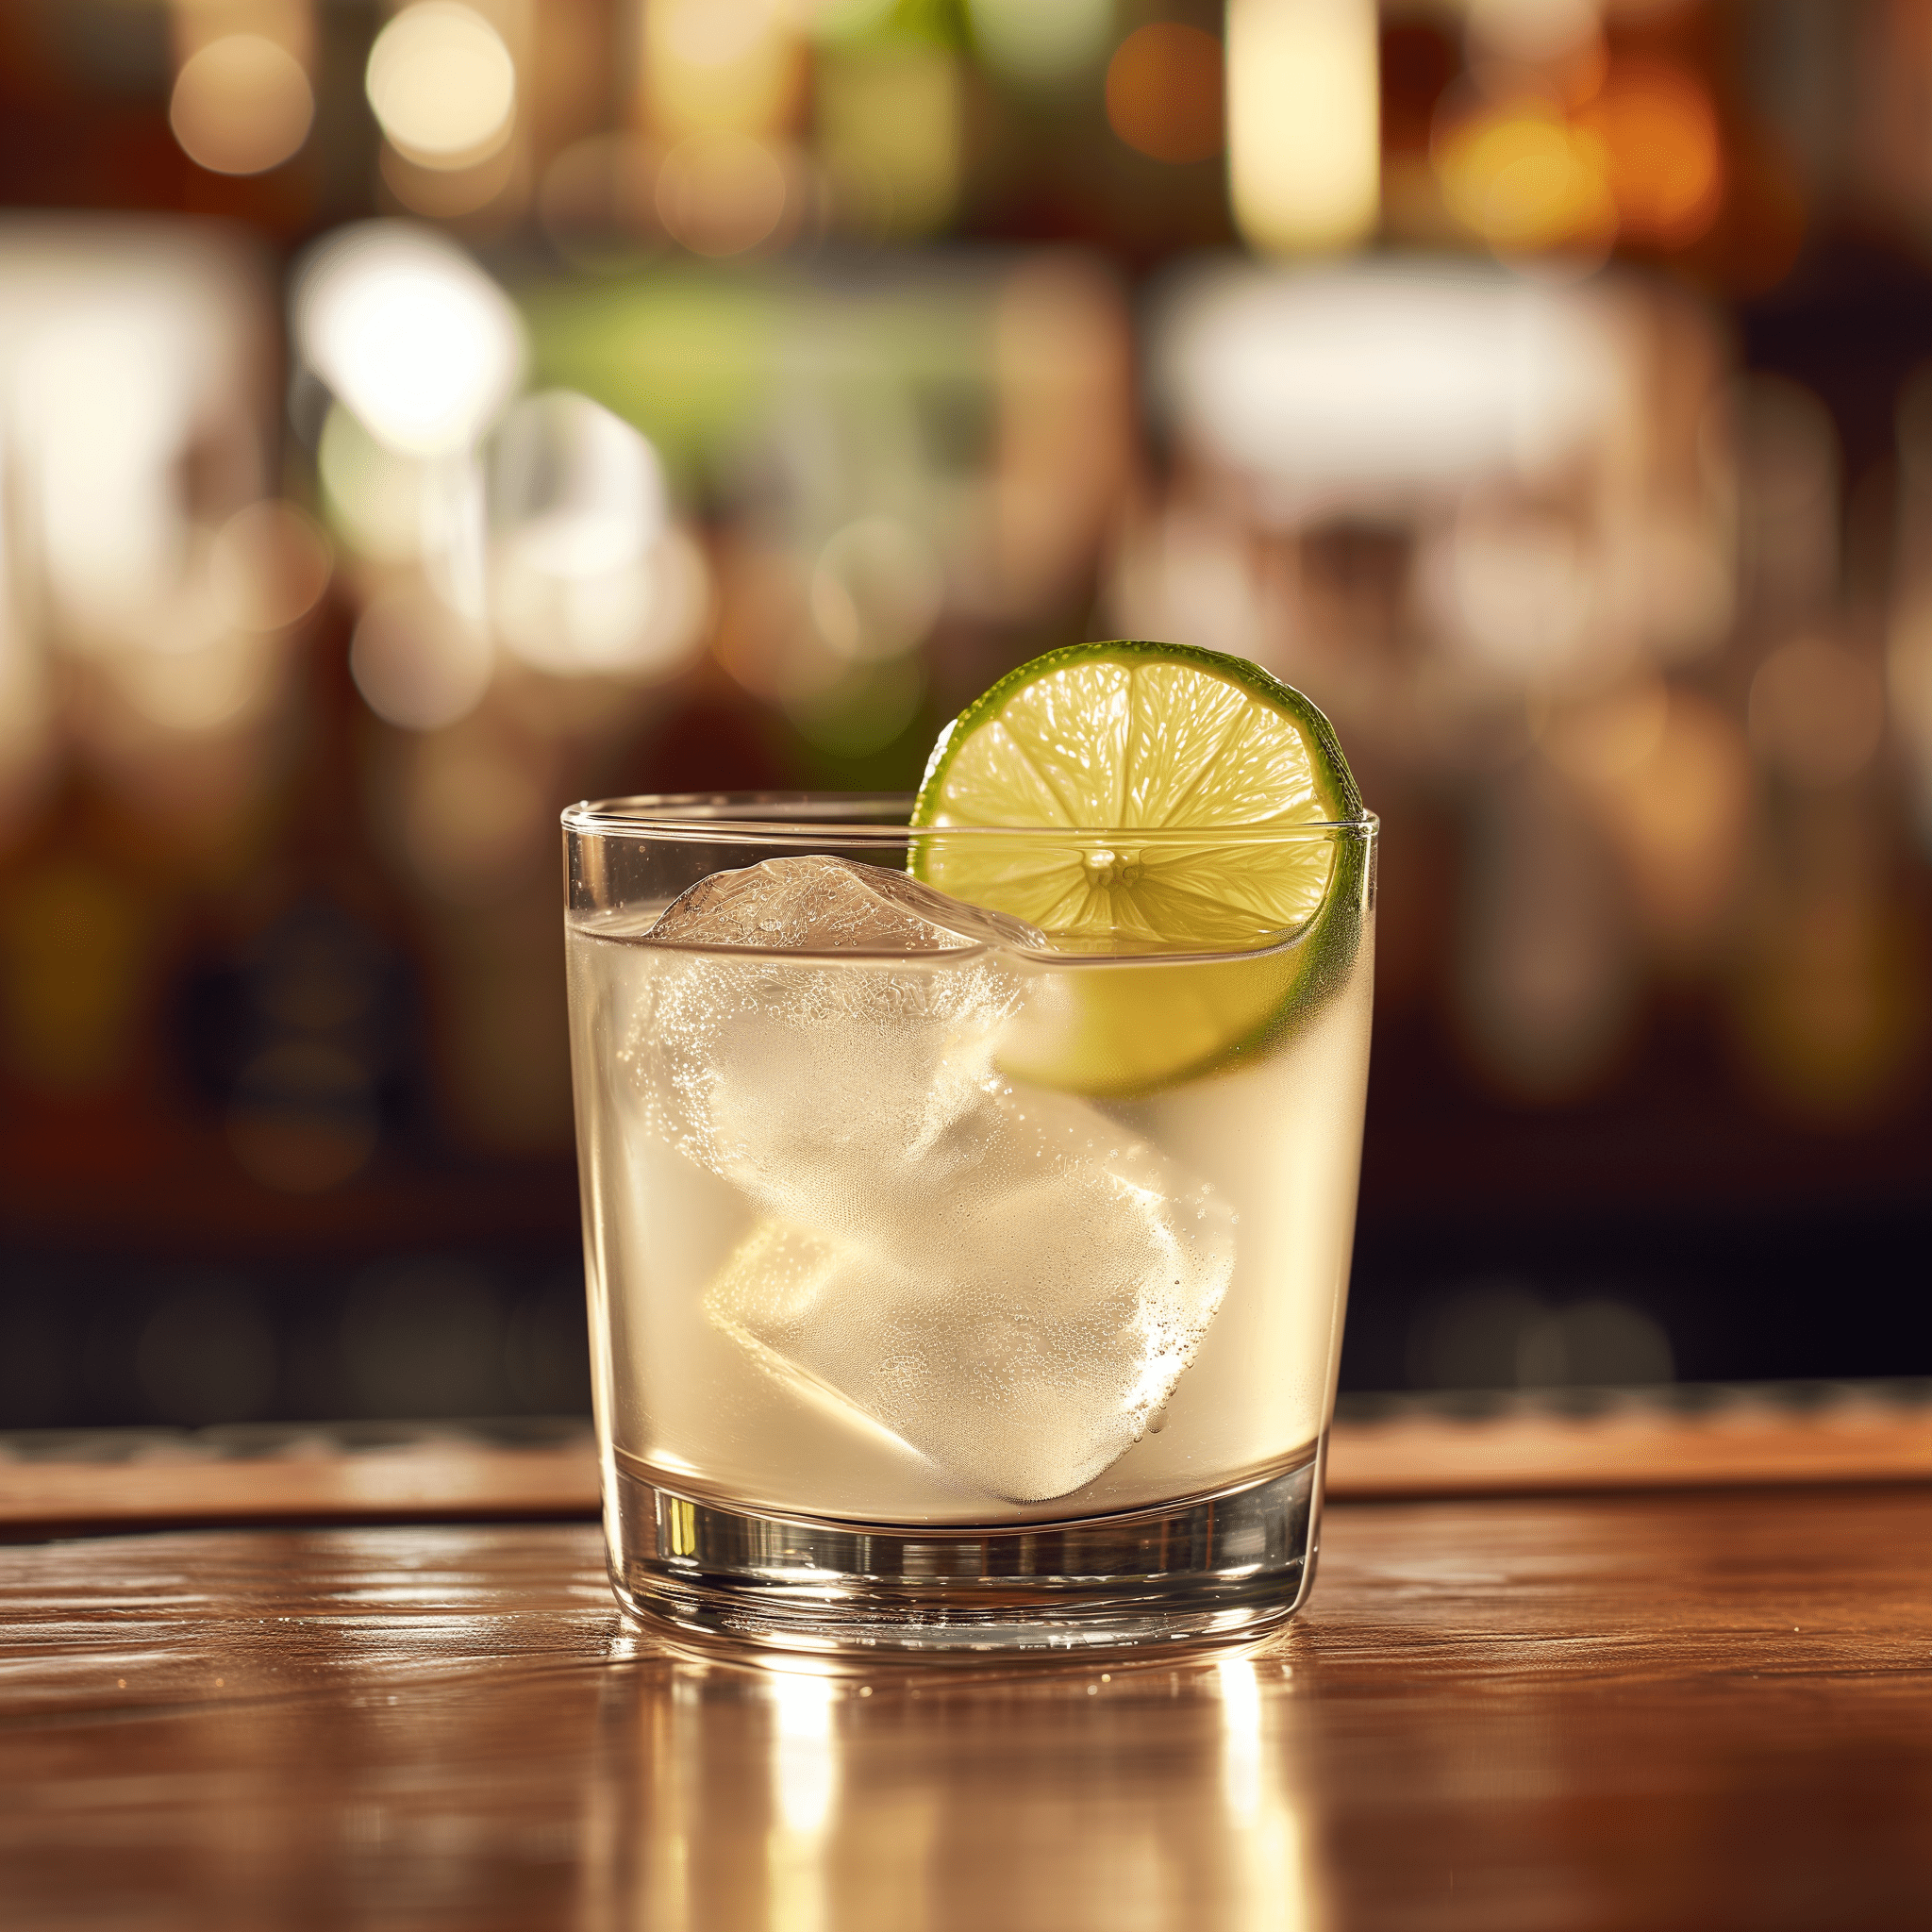 Tequila Rickey Cocktail Recipe - The Tequila Rickey has a crisp and refreshing taste with a balance of tartness from the lime and a subtle sweetness from the agave nectar. The blanco tequila provides a smooth, earthy base, while the soda water adds a fizzy lift.